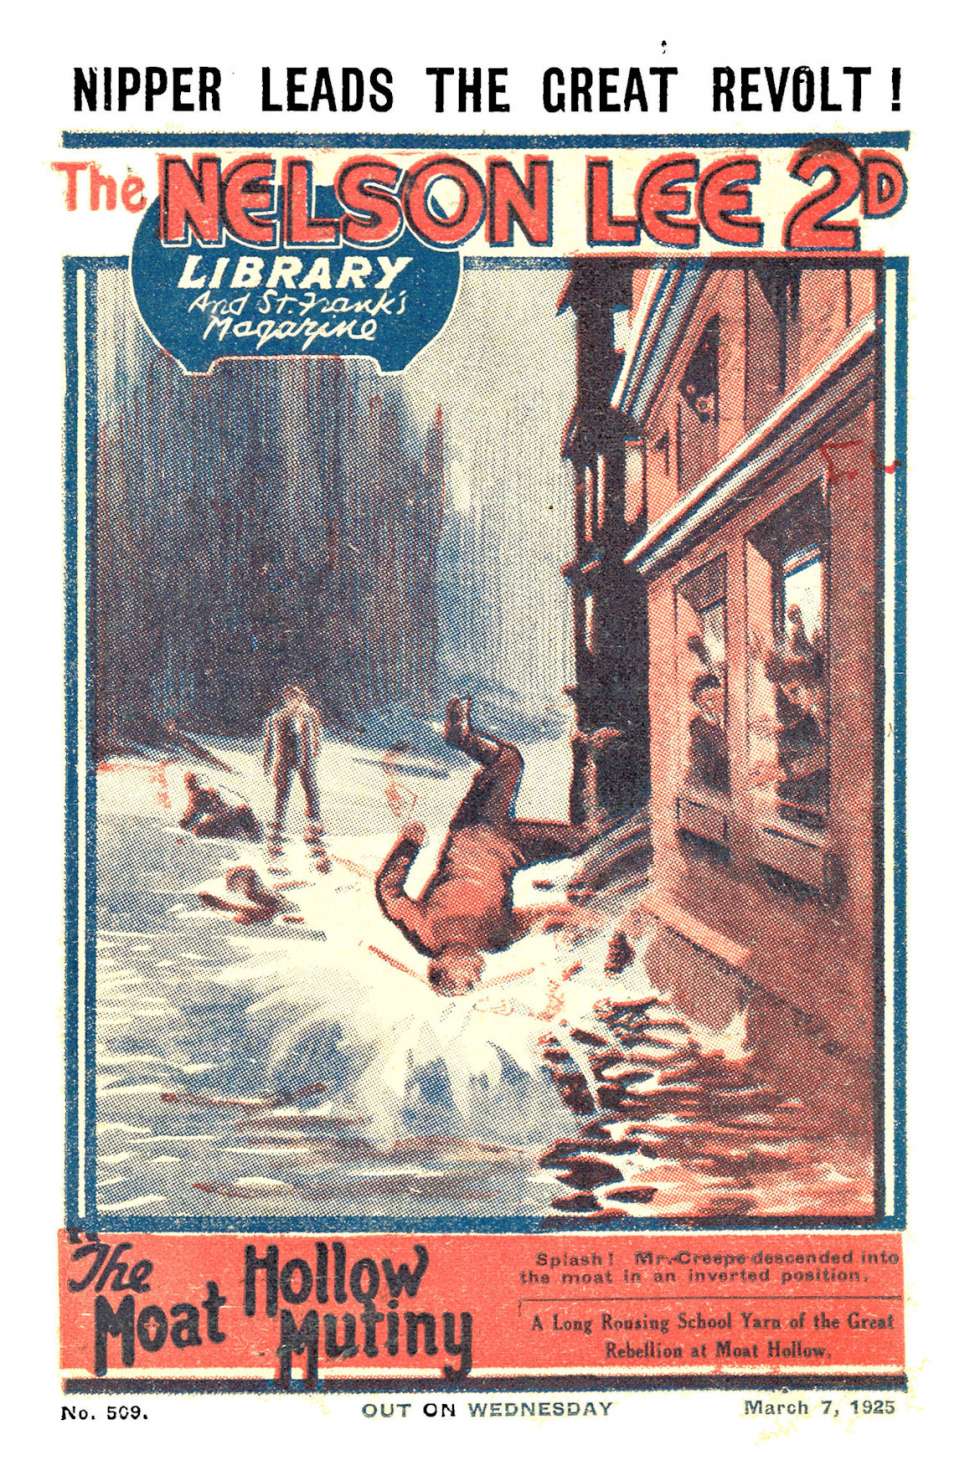 Comic Book Cover For Nelson Lee Library s1 509 - The Moat Hollow Mutiny